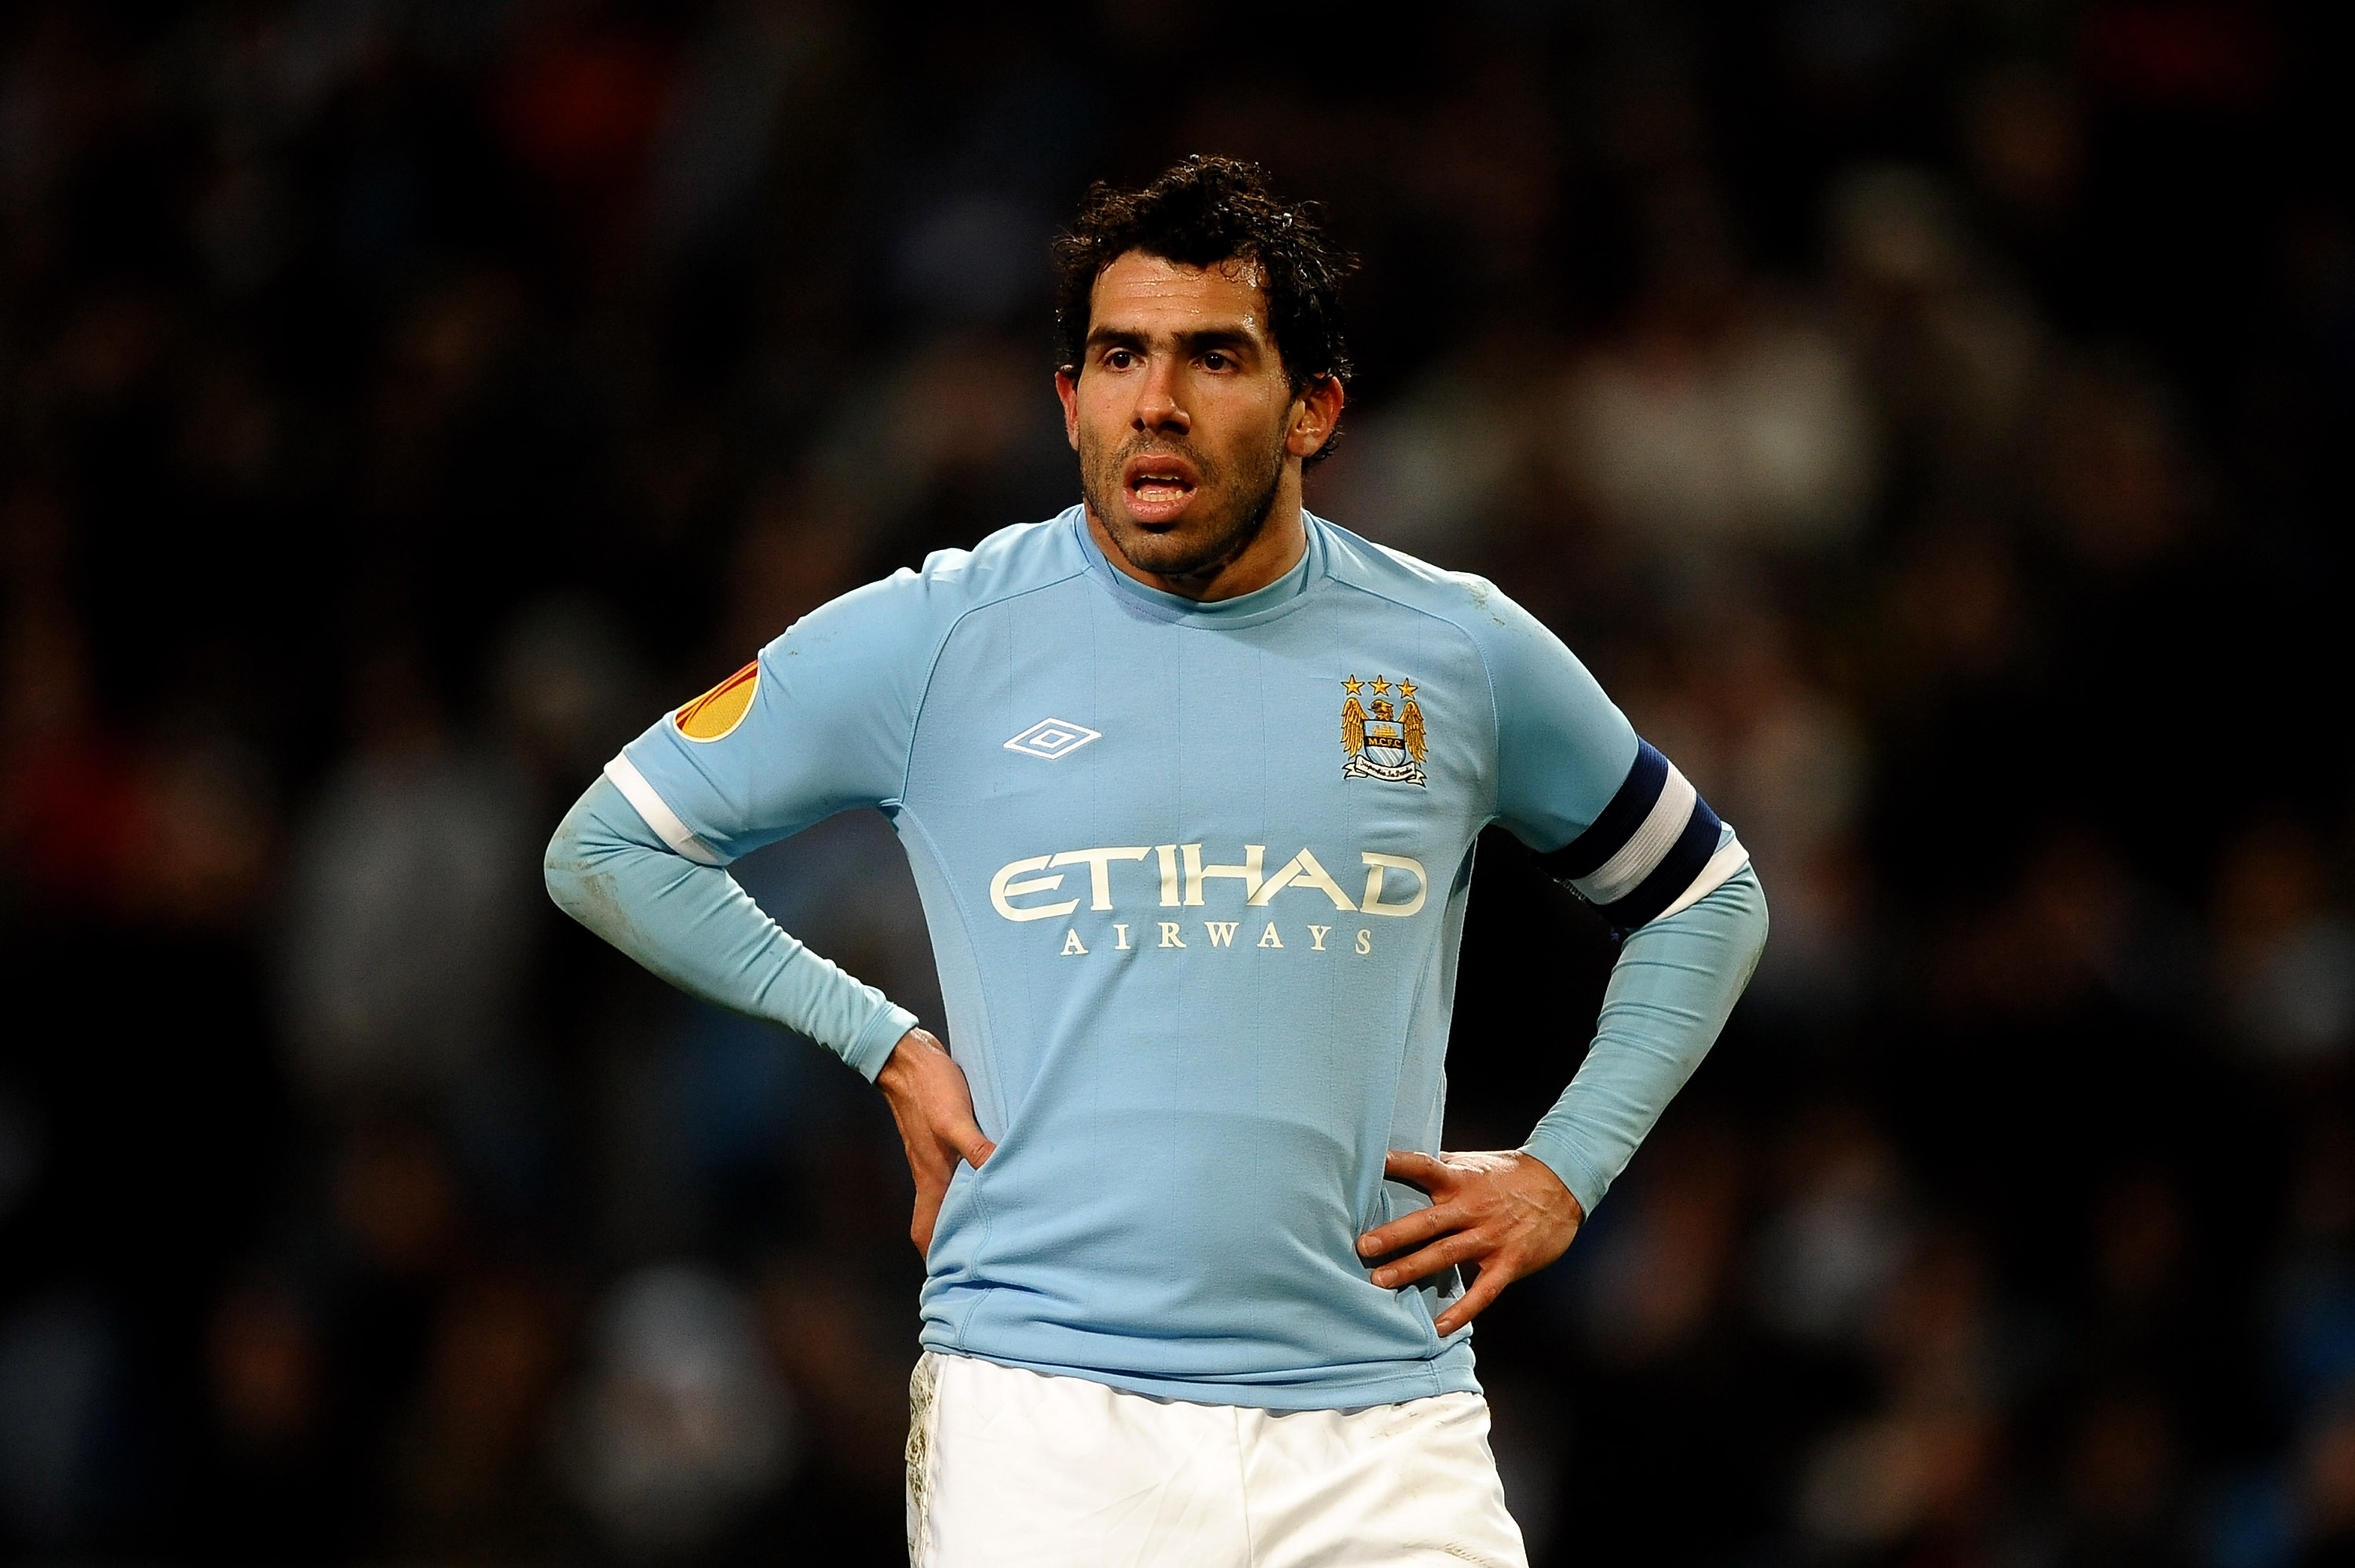 MANCHESTER, ENGLAND - MARCH 17:  Carlos Tevez of Manchester City looks on during the UEFA Europa League round of 16 second leg match between Manchester City and Dynamo Kiev at City of Manchester Stadium on March 17, 2011 in Manchester, England.  (Photo by